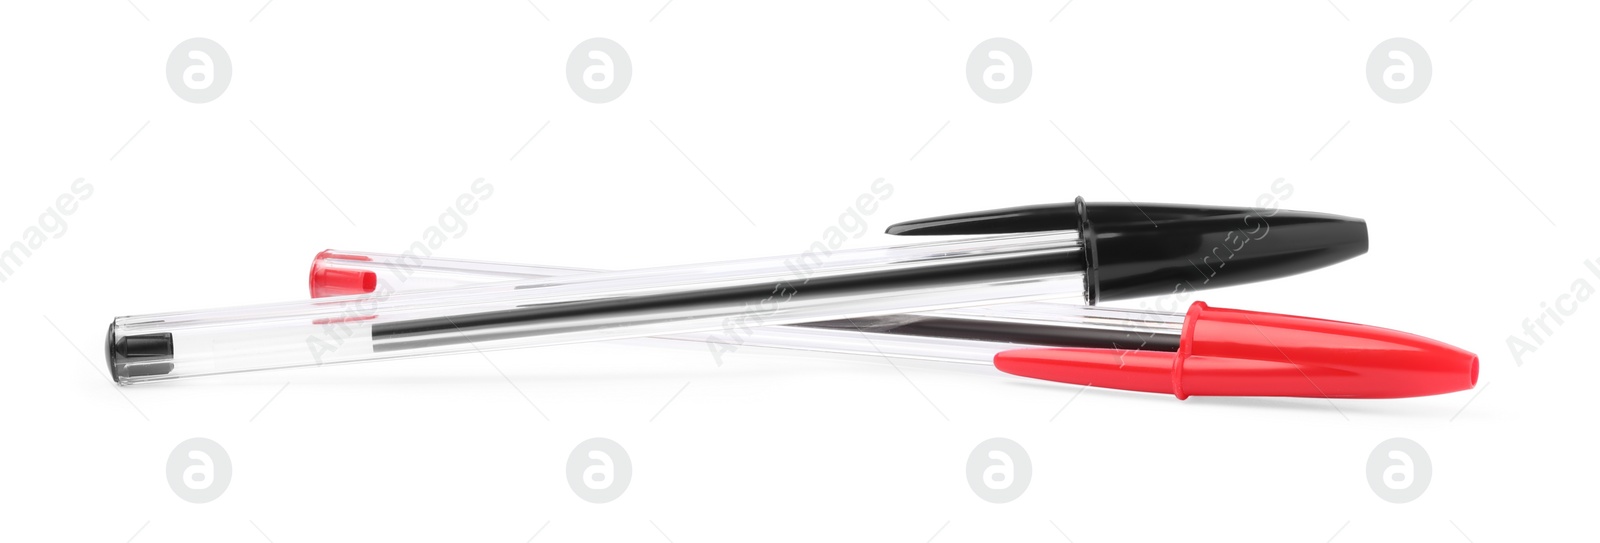 Photo of New black and red plastic pens isolated on white